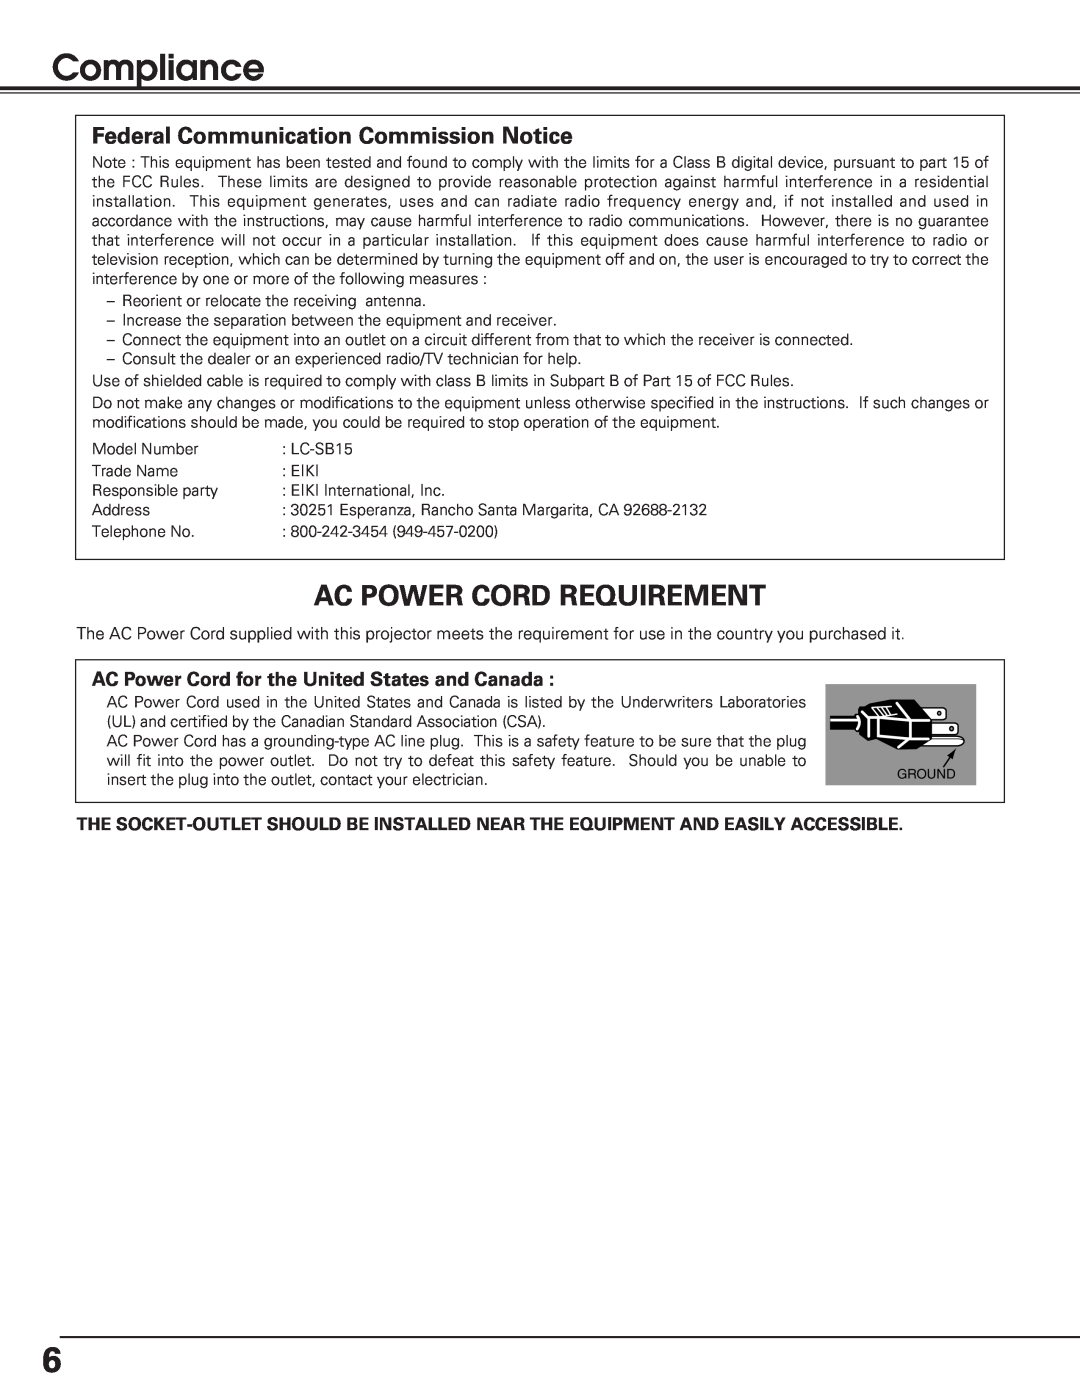 Eiki lc-sb15 owner manual Compliance, Ac Power Cord Requirement, Federal Communication Commission Notice 